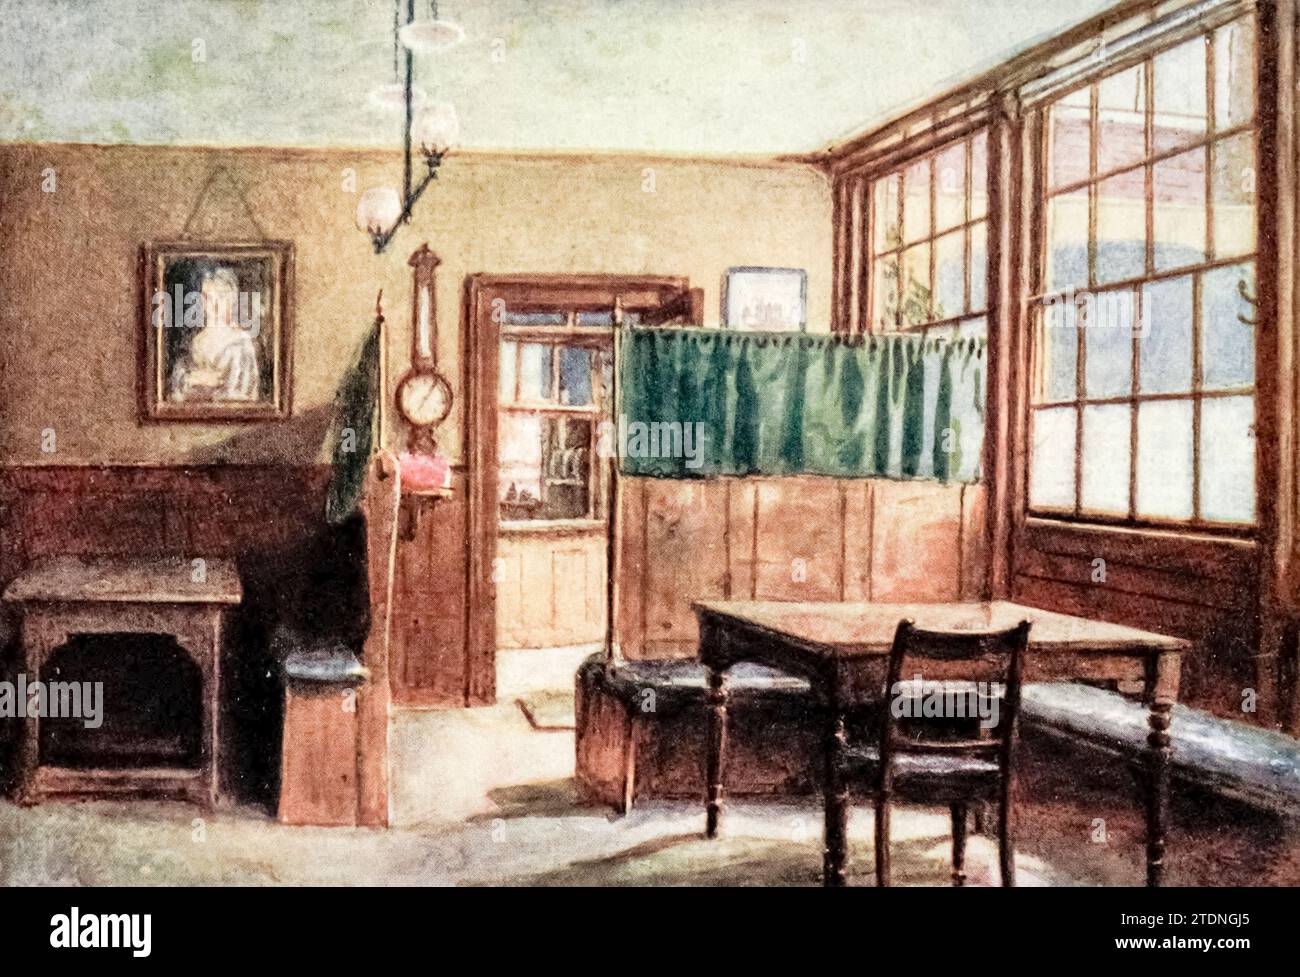 Coffee-room of Old Bell Inn, Holborn, 1897 The Ward of Farringdon With from the book ' London vanished and vanishing ' by Norman, Philip, 1842-1931 Published in 1905 in London by Adam & Charles Black Philip E Norman FSA (9 July 1842 – 17 May 1931) was a British artist, author and antiquary. Stock Photo